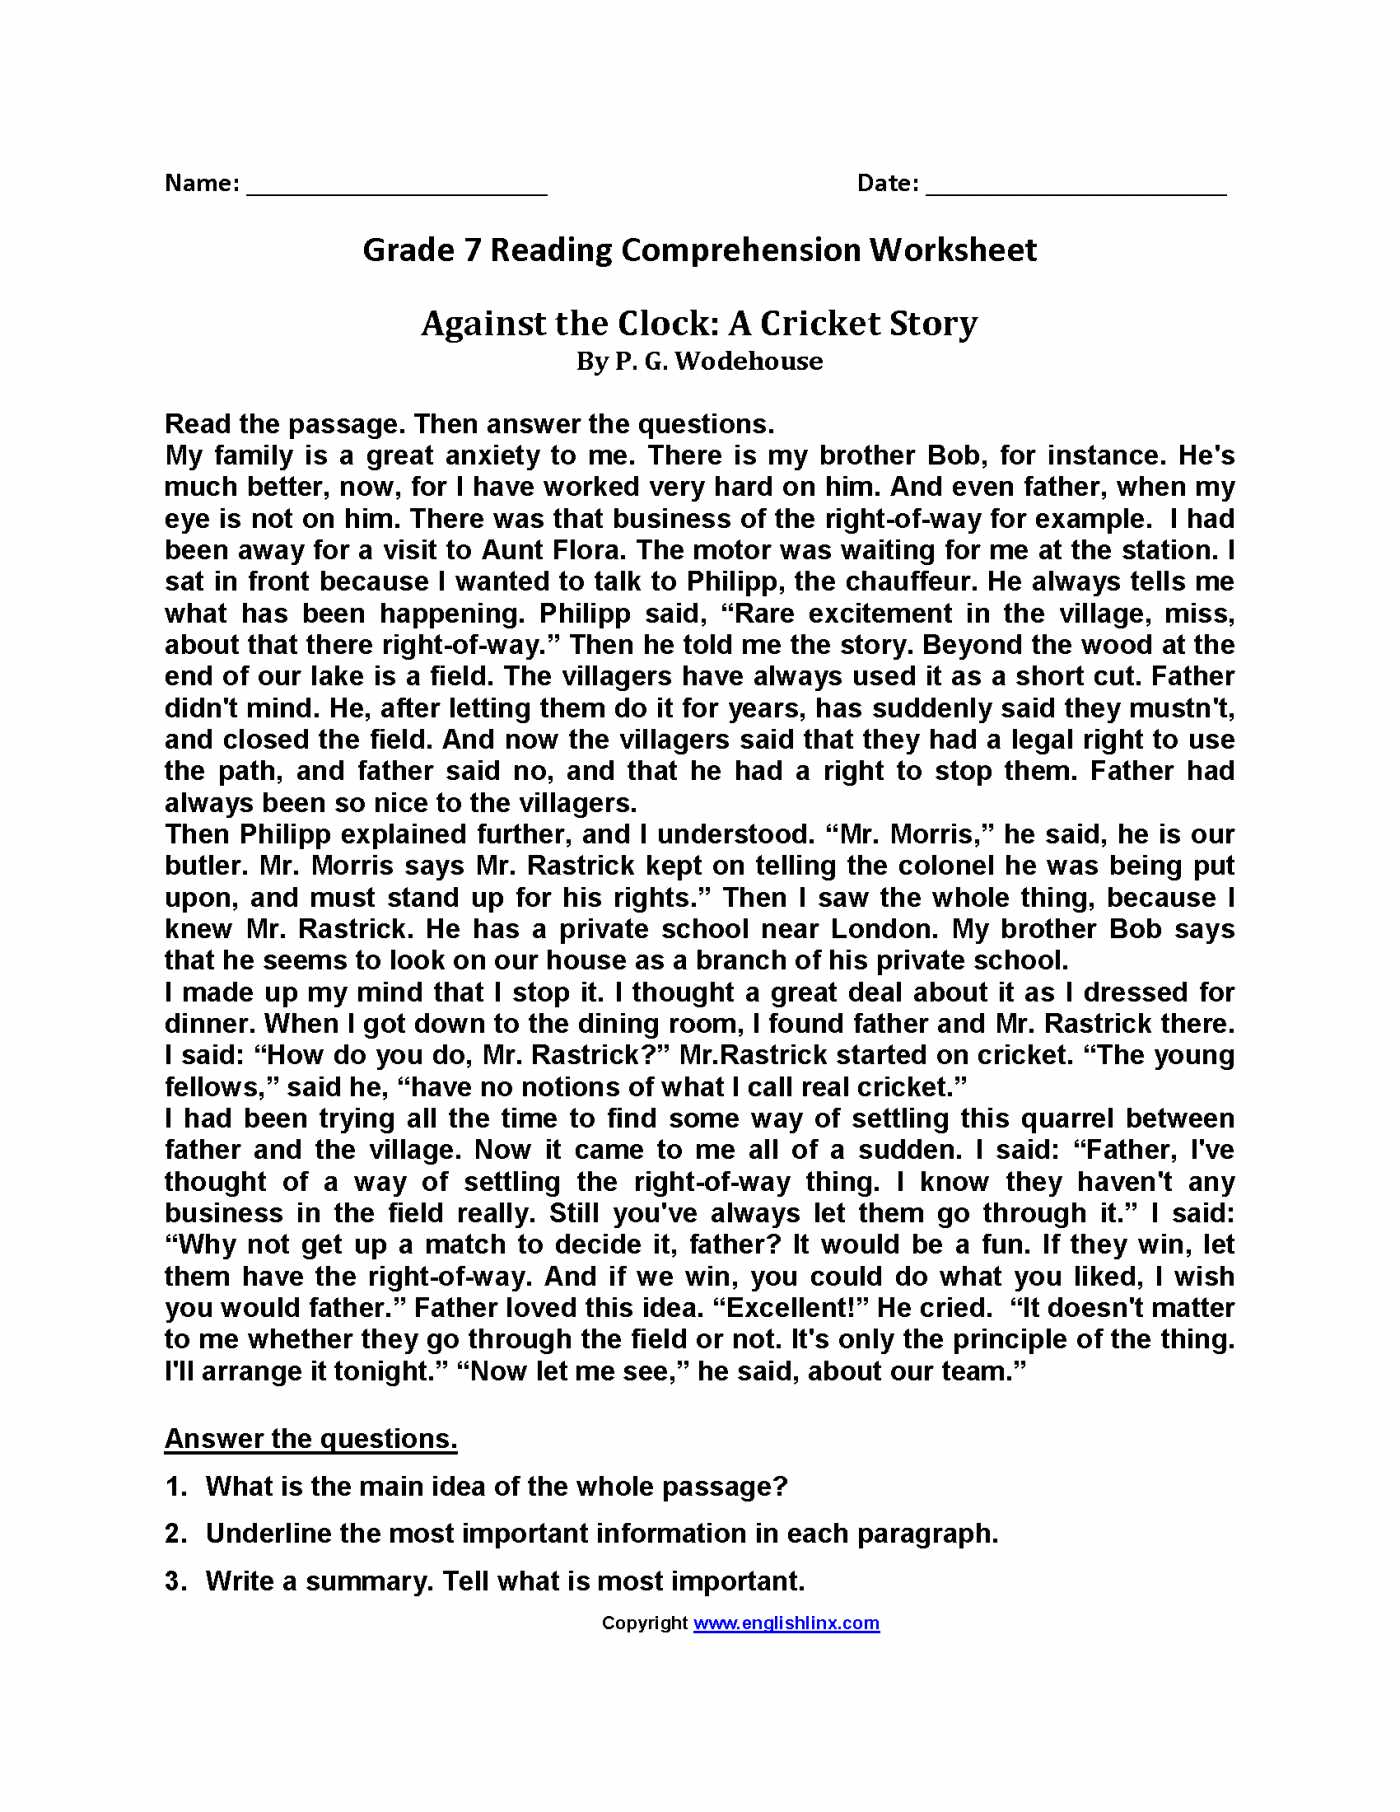 4th Grade Reading Comprehension Worksheets Multiple Choice as Well as Reading Prehension Worksheets for 5thrade Multiple Choice